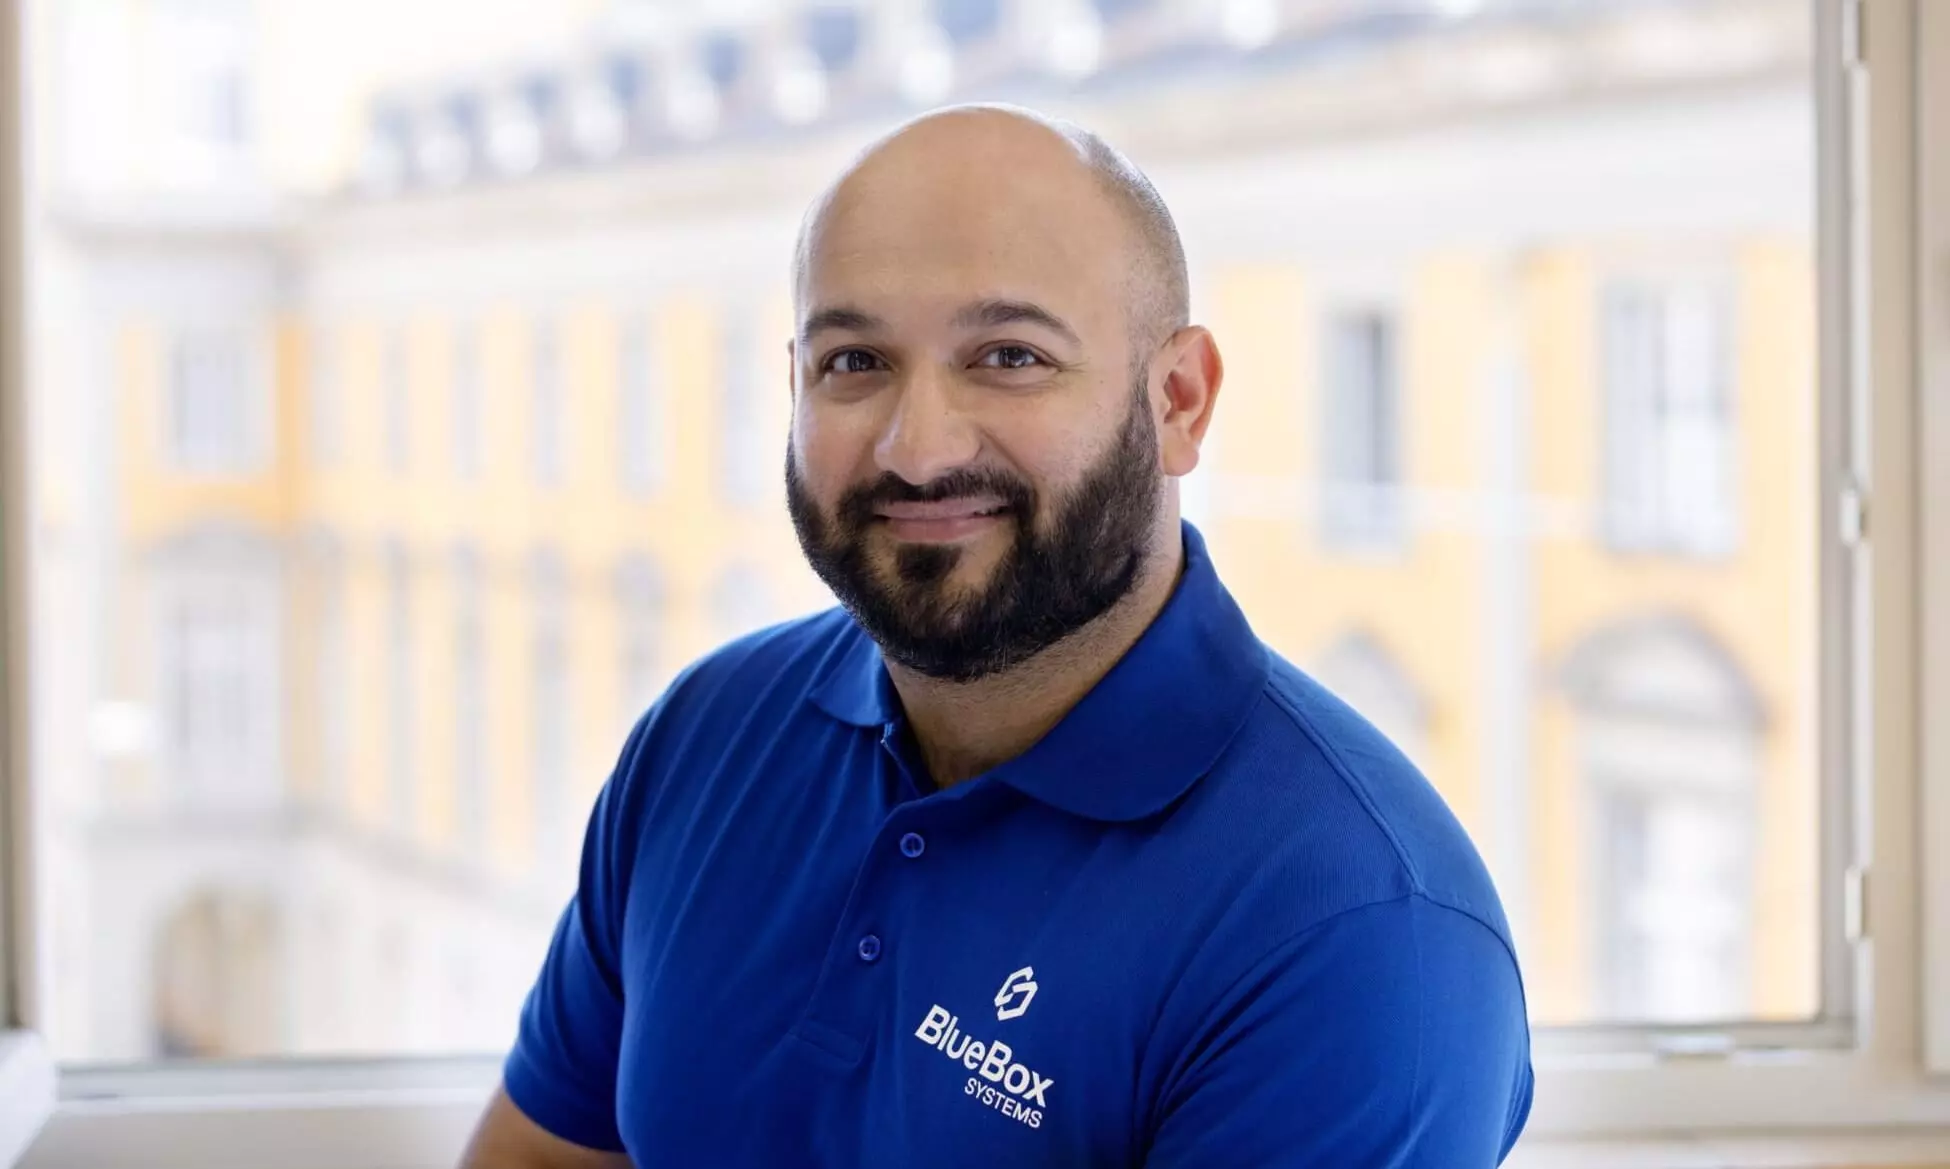 BlueBox Systems appoints Usman Khan as global sales manager